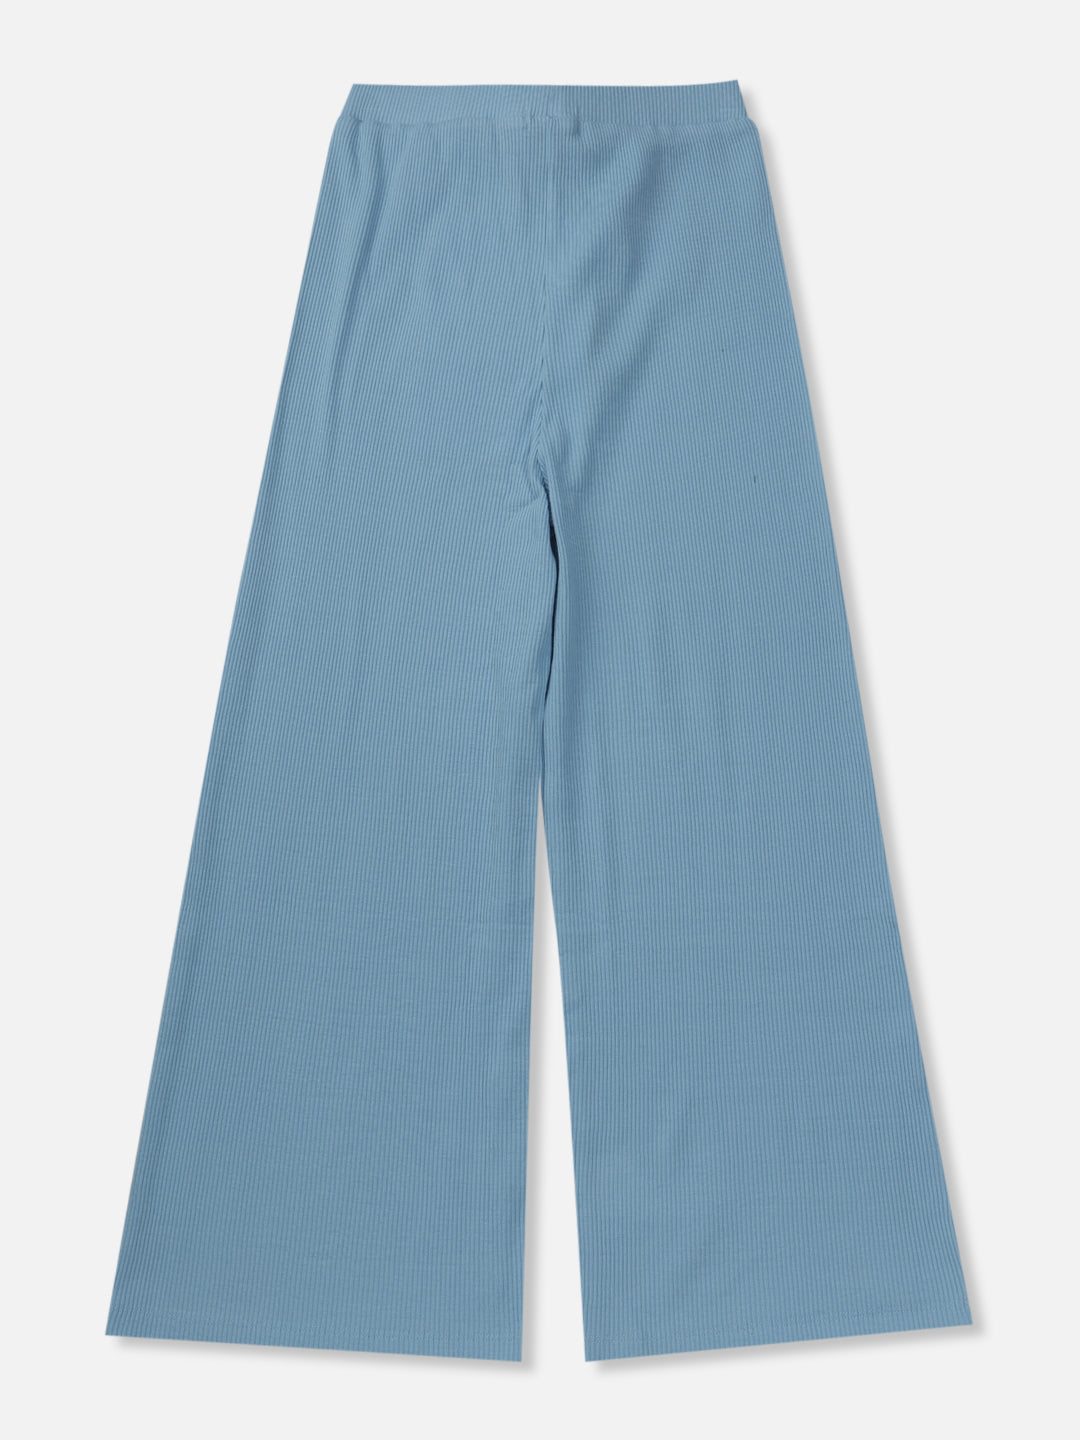 Girls Blue Cotton Solid Elasticated Culottes